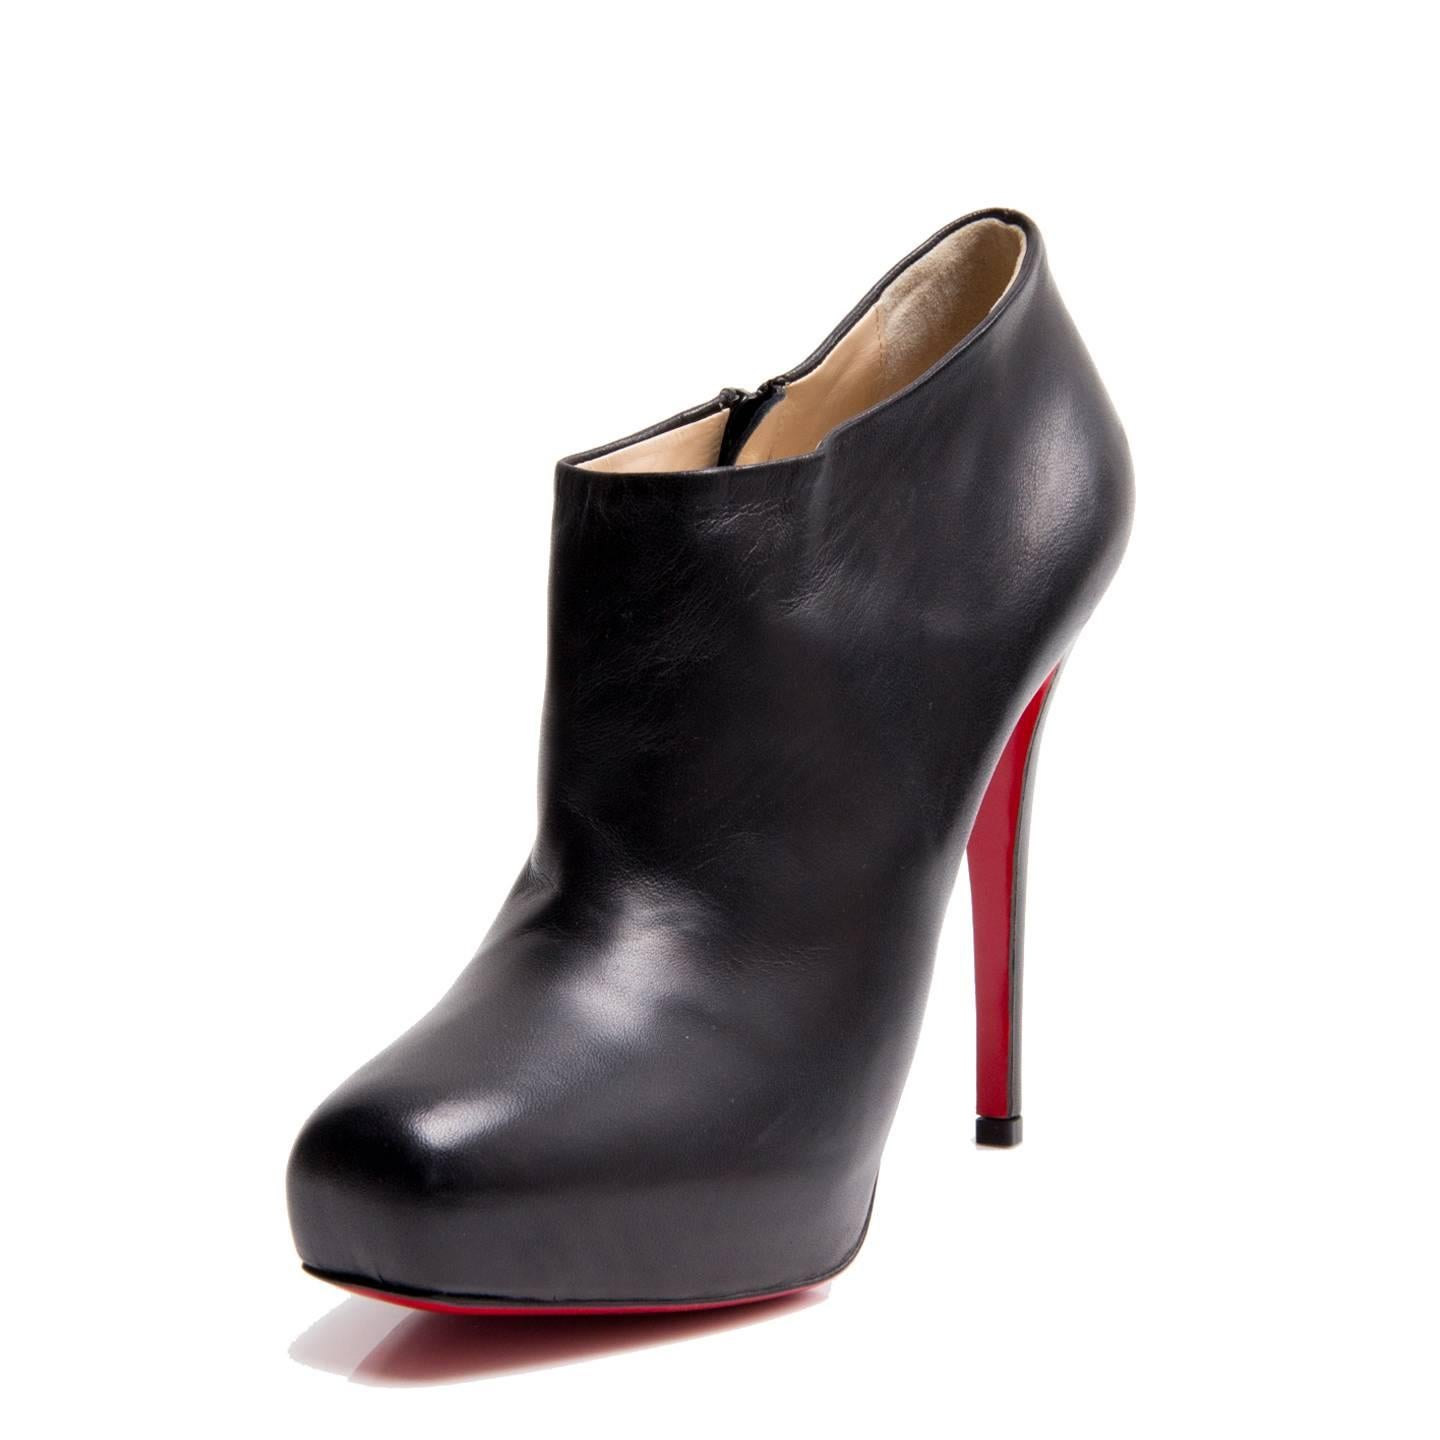 Black leather square toe ankle boots with stiletto heel and zipper on the inner side. Made in Italy. Heel: 5